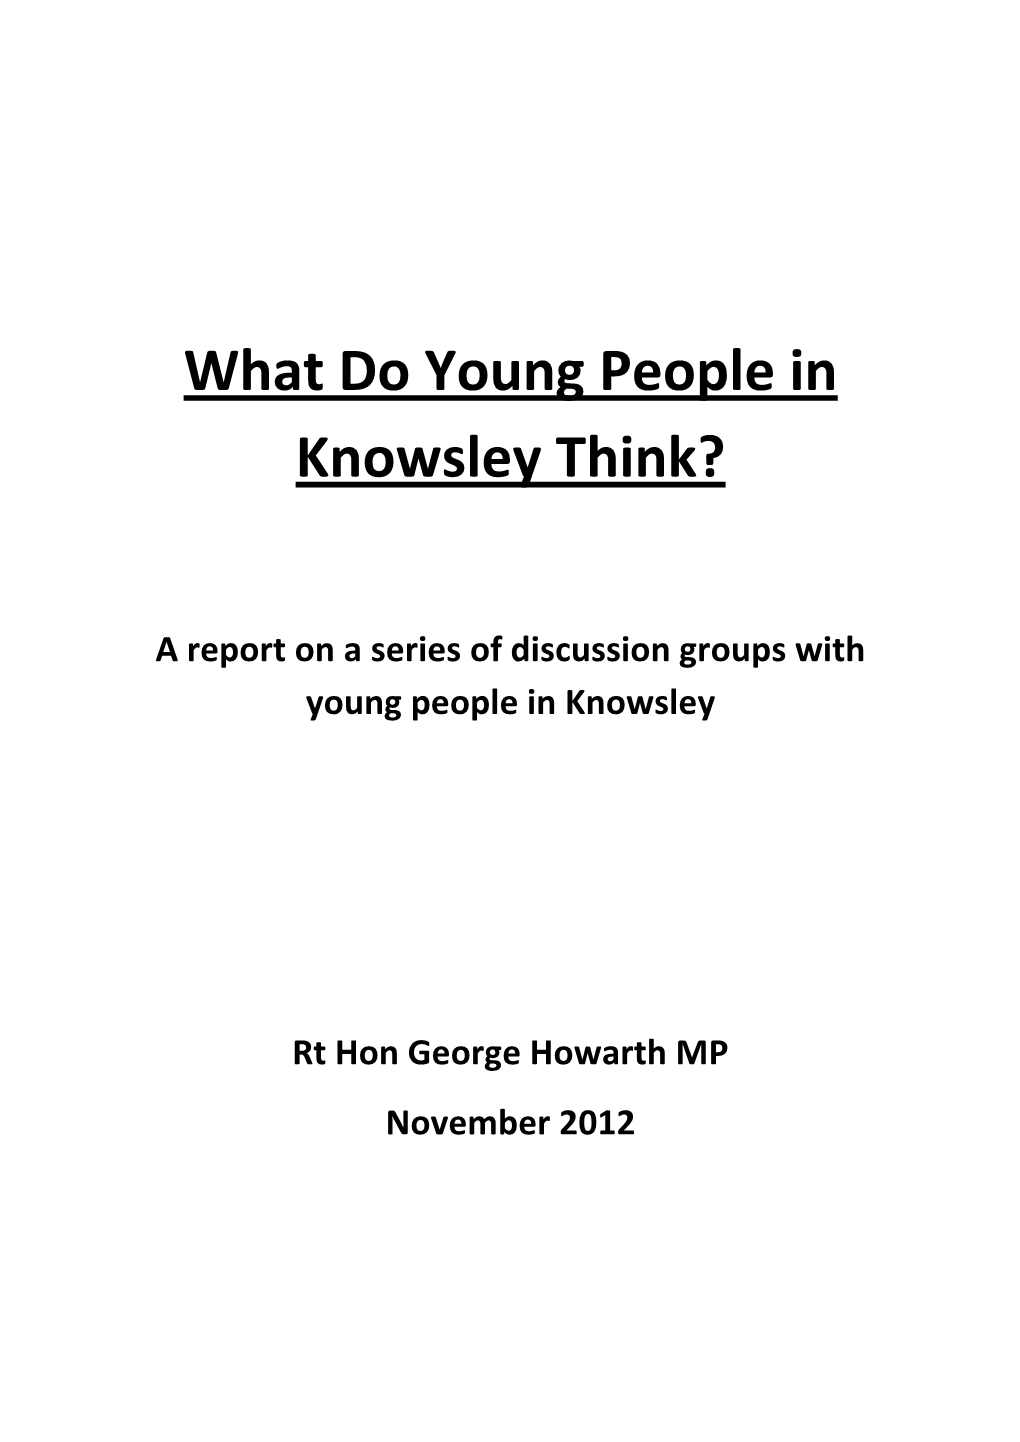 What Do Young People in Knowsley Think?